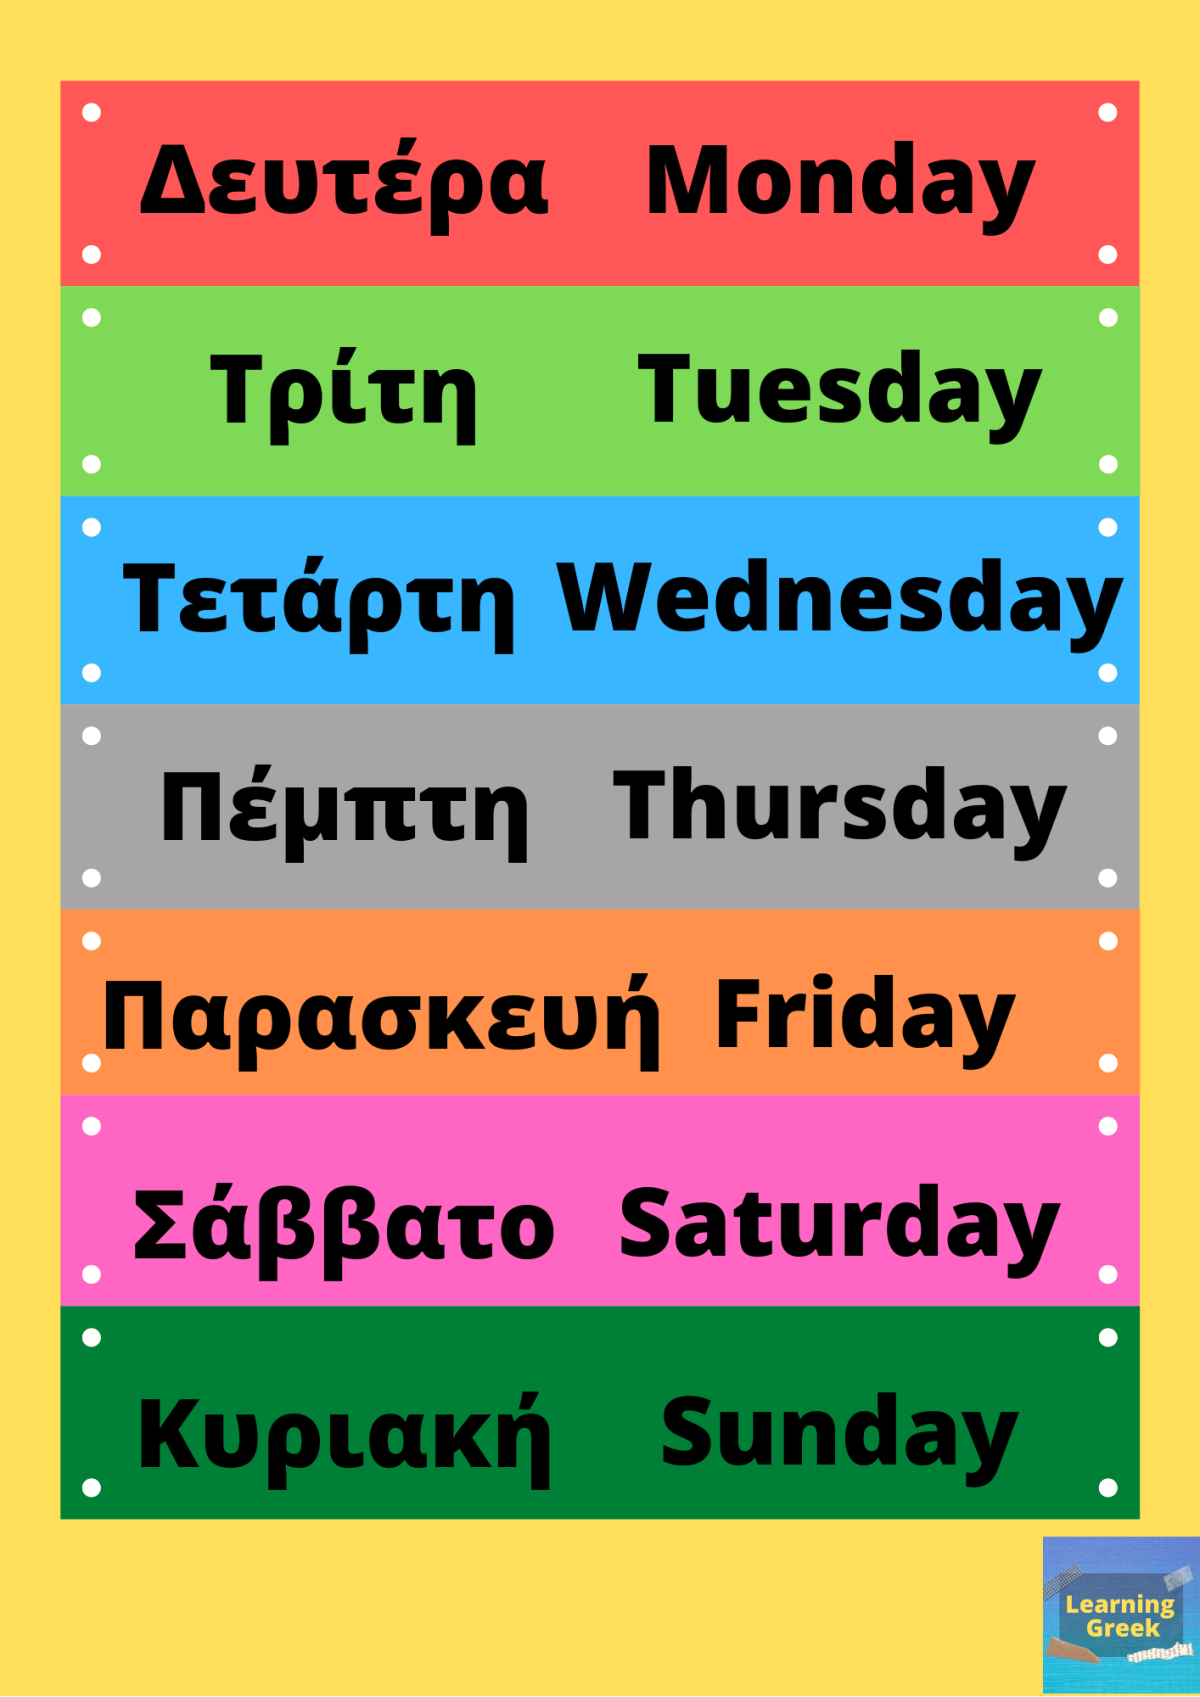 Days of the week in Greek, related vocabulary and interesting facts!